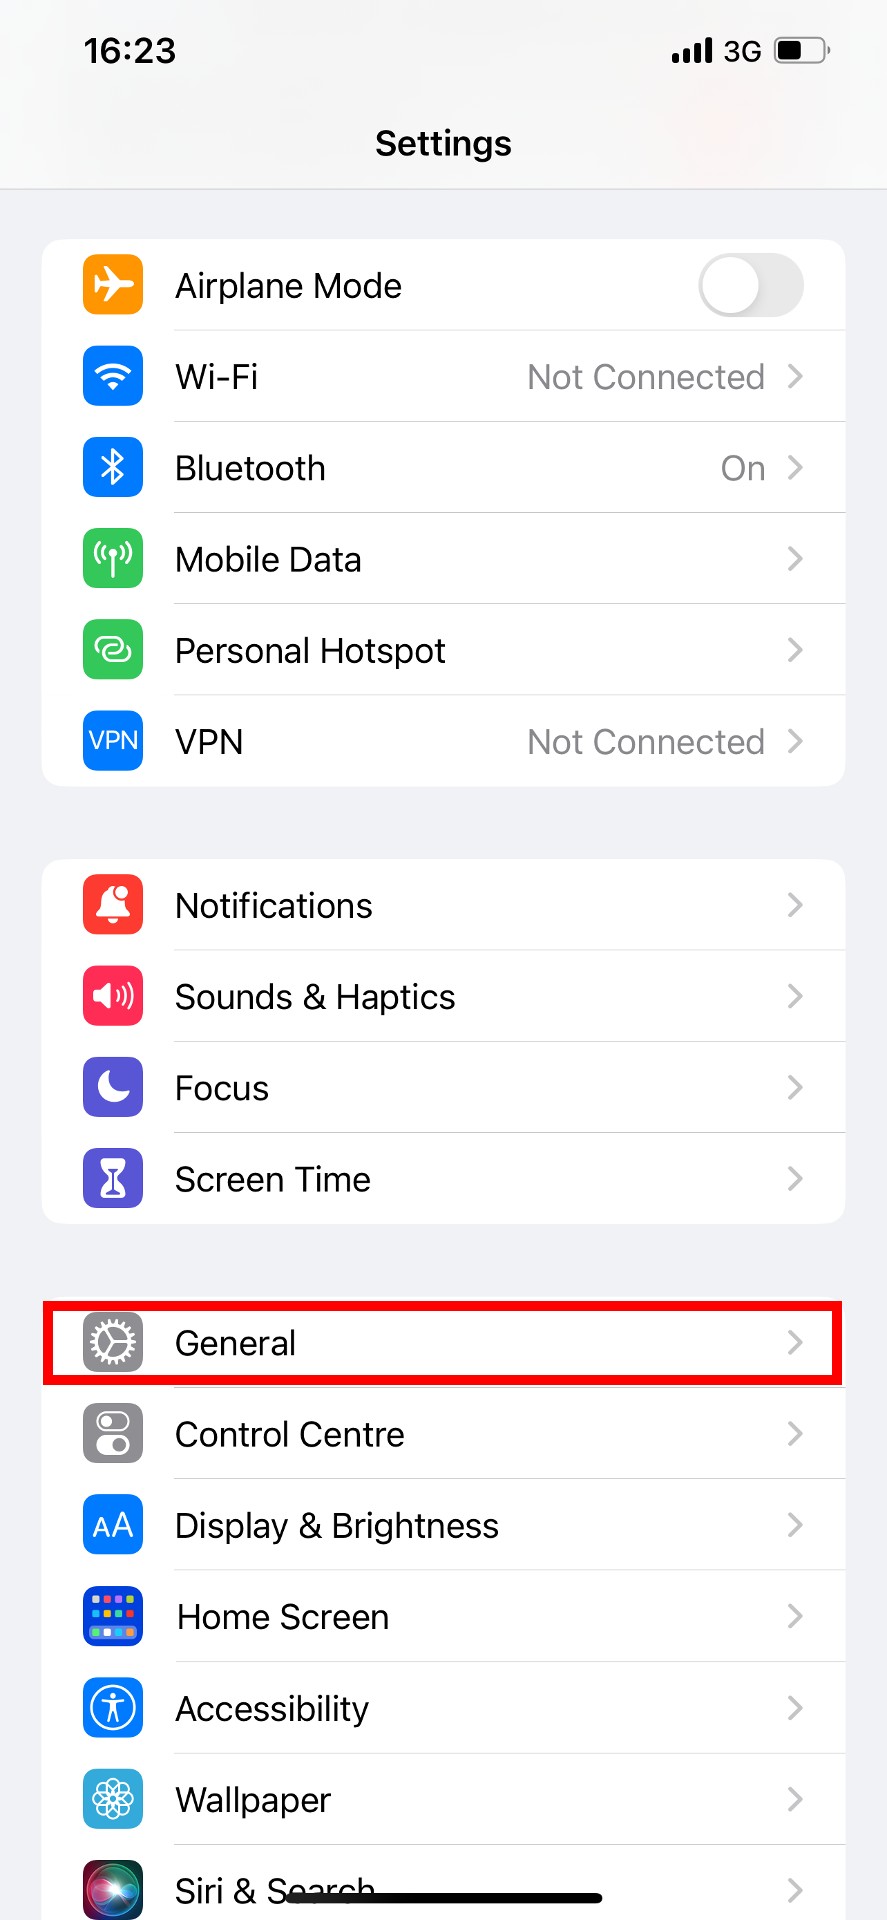 iOS settings with "General" highlighted